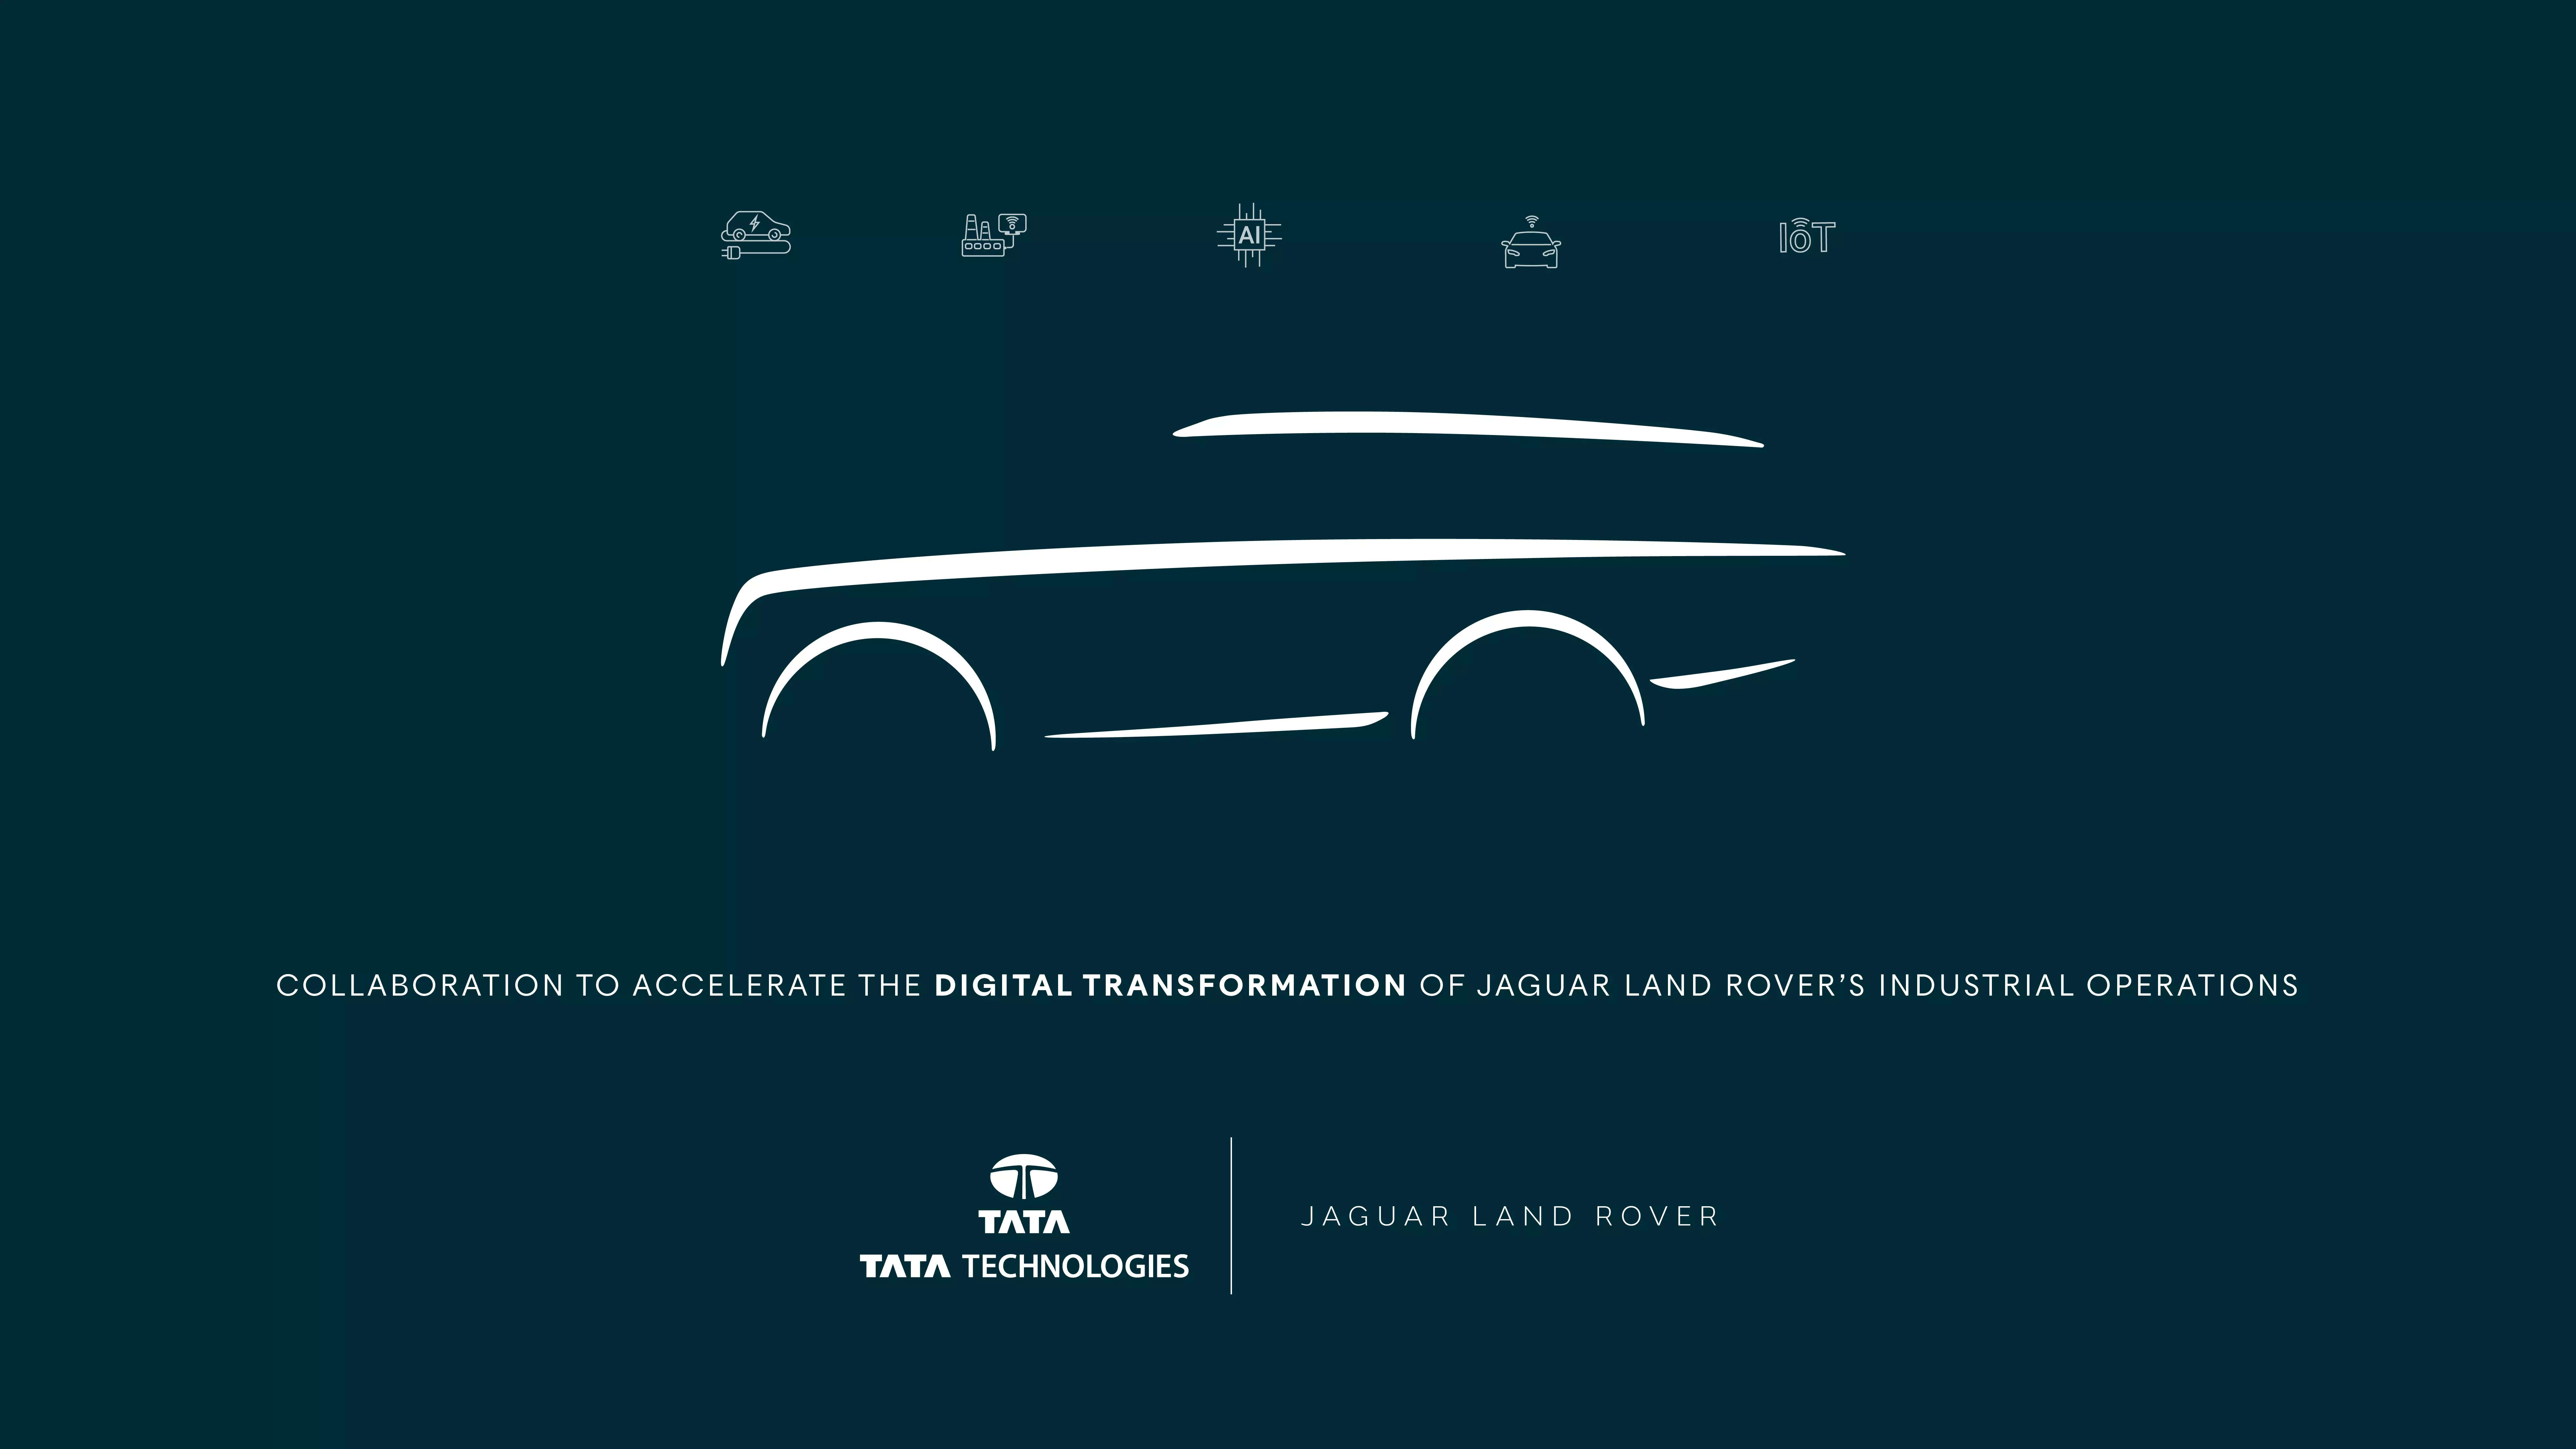  The agreement furthers Jaguar Land Rover’s alignment with the Tata Group of companies as part of its Reimagine strategy.